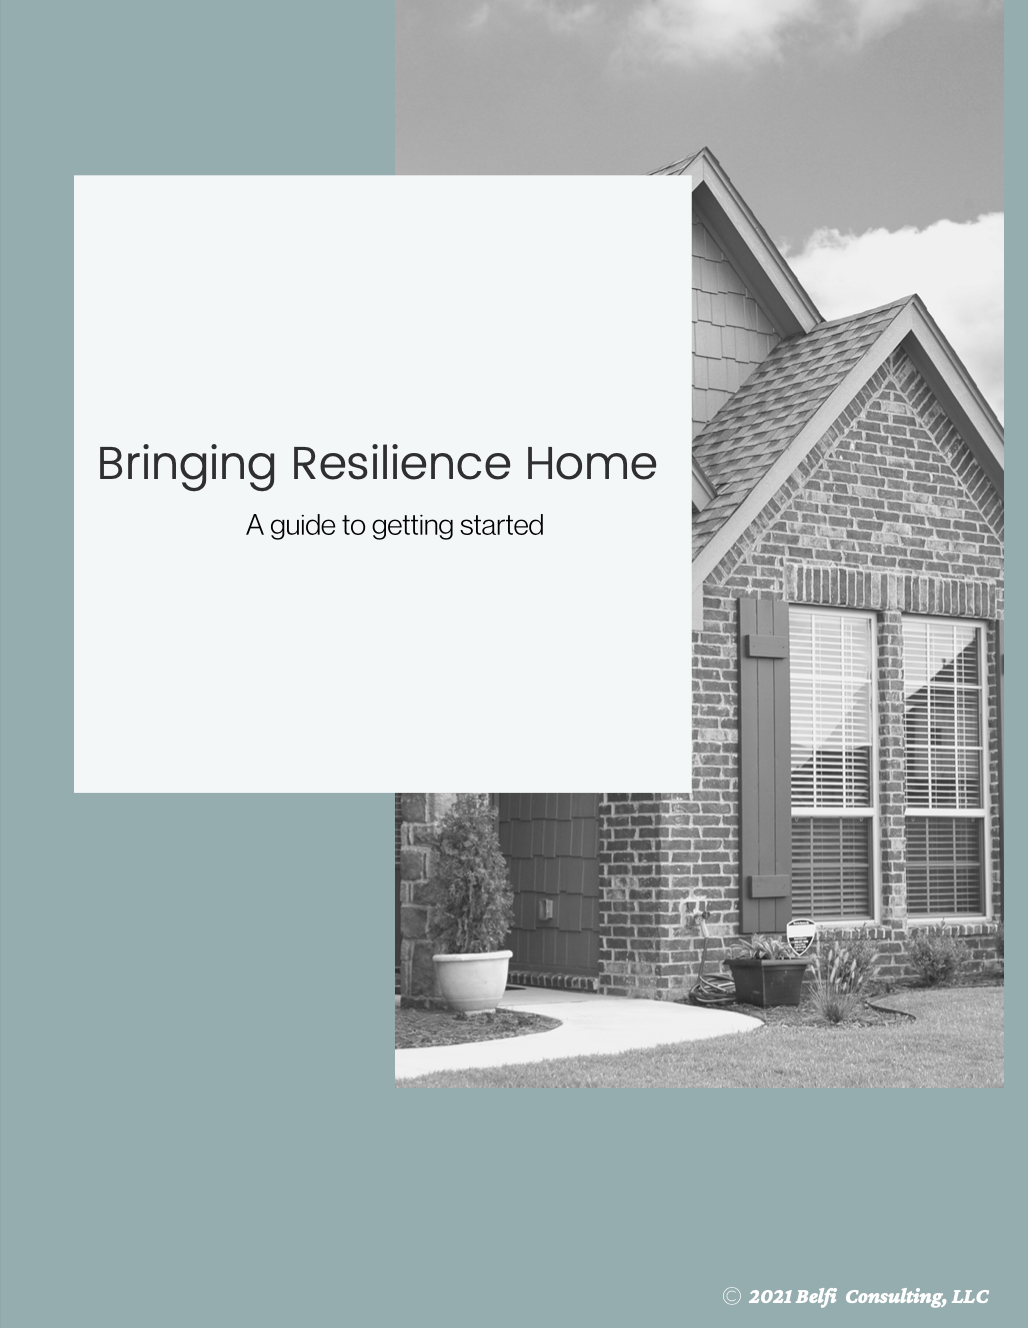 "Bringing Resilience Home" is the new e-book by Katie Belfi. Launched to help the individual prepare for any tragedy that may lie ahead. The full e-book is available at www.KatieBelfi.com, under the Resources tab. 